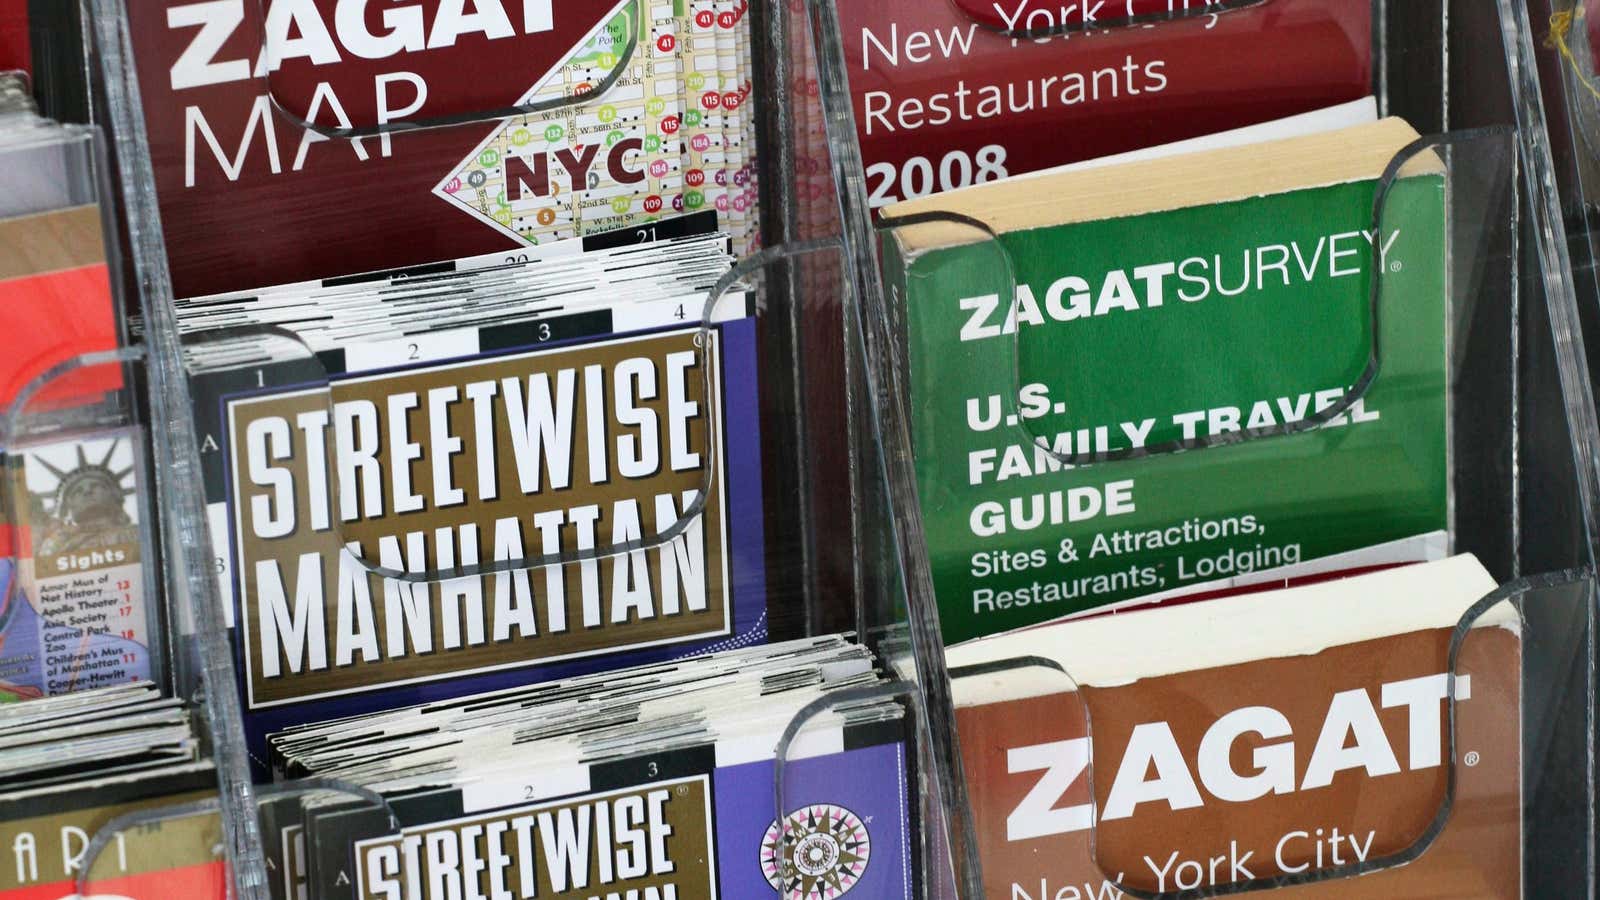 Zagat is perfectly positioned to fix the Yelp review model